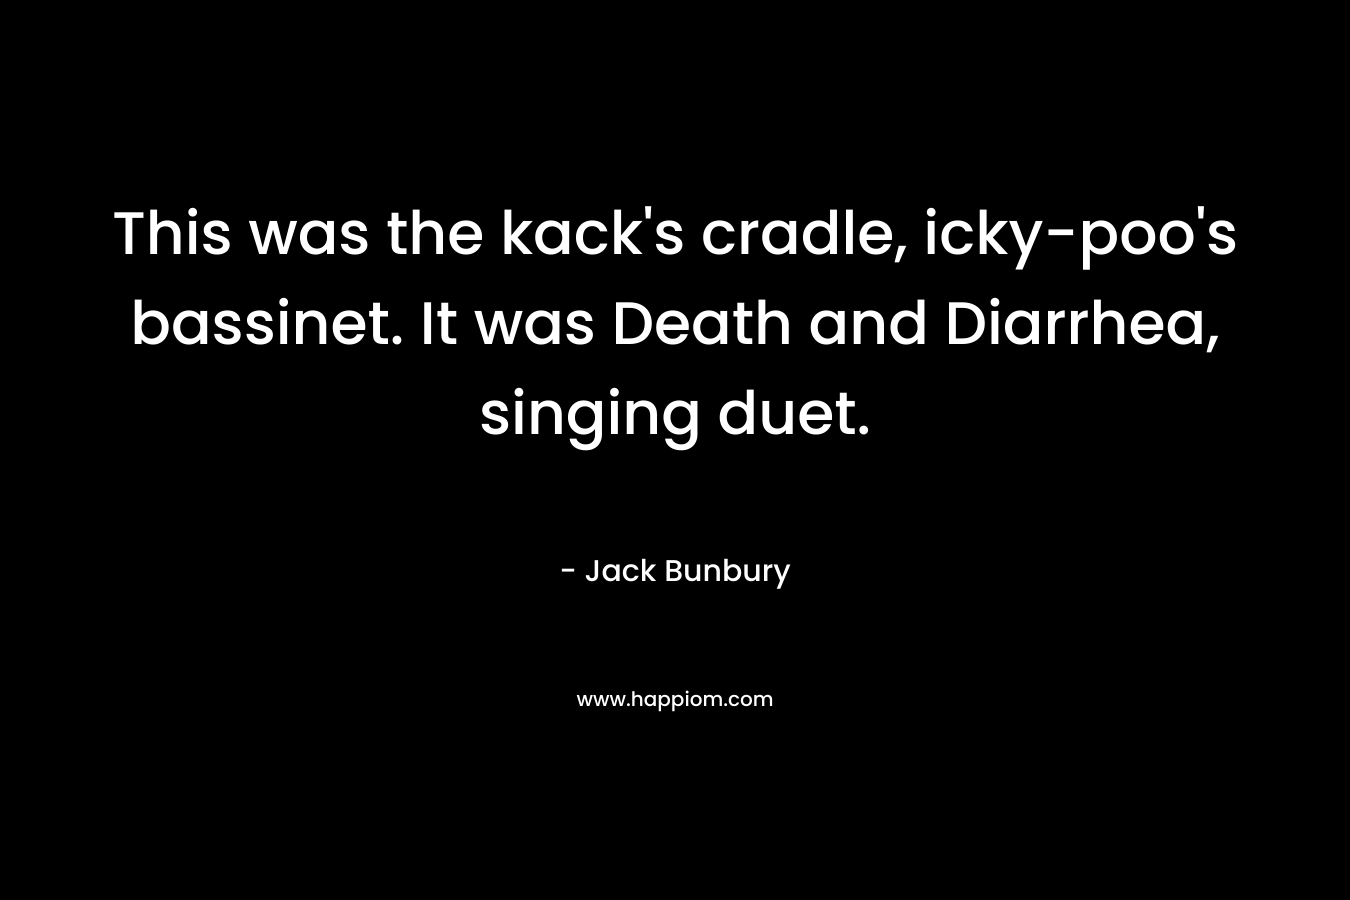 This was the kack’s cradle, icky-poo’s bassinet. It was Death and Diarrhea, singing duet. – Jack Bunbury